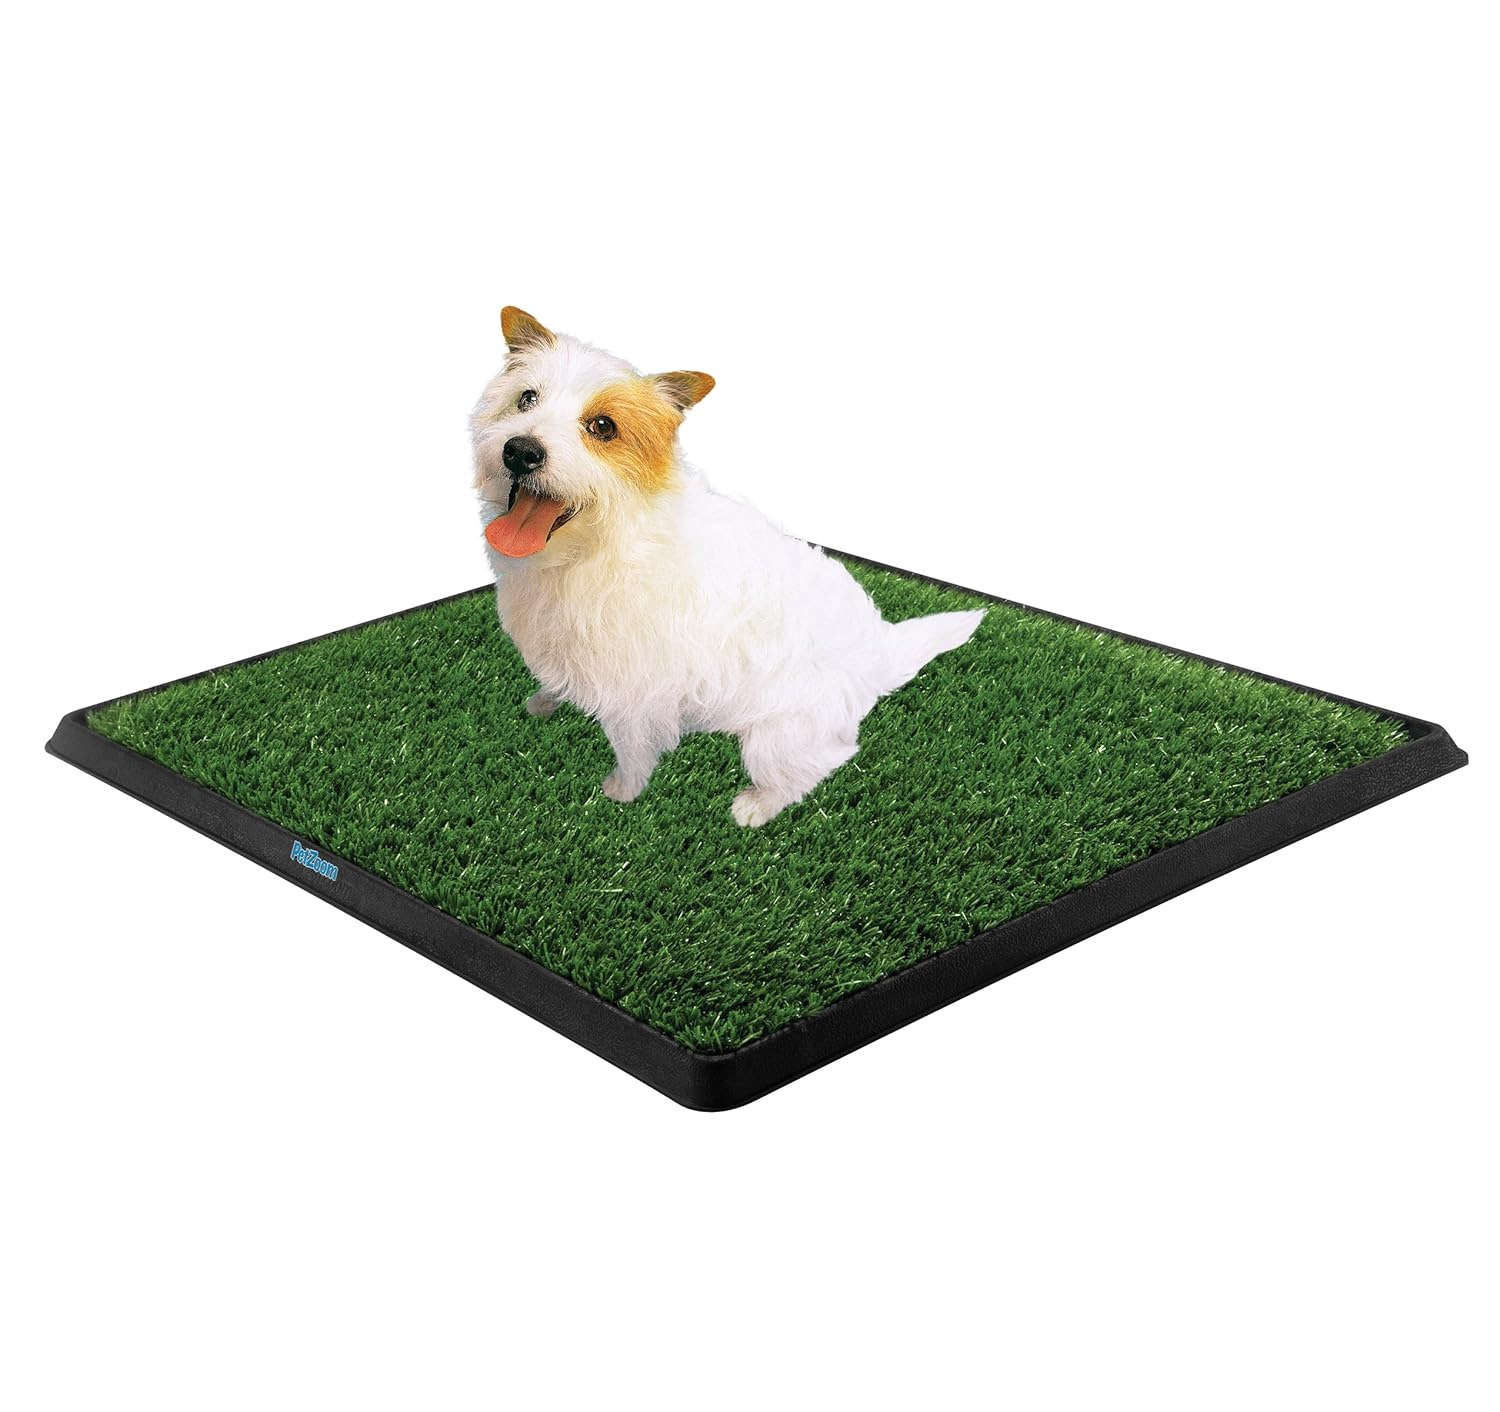 NEW Portable Indoor Training Toilet, Pet Potty Grass Puppy ...